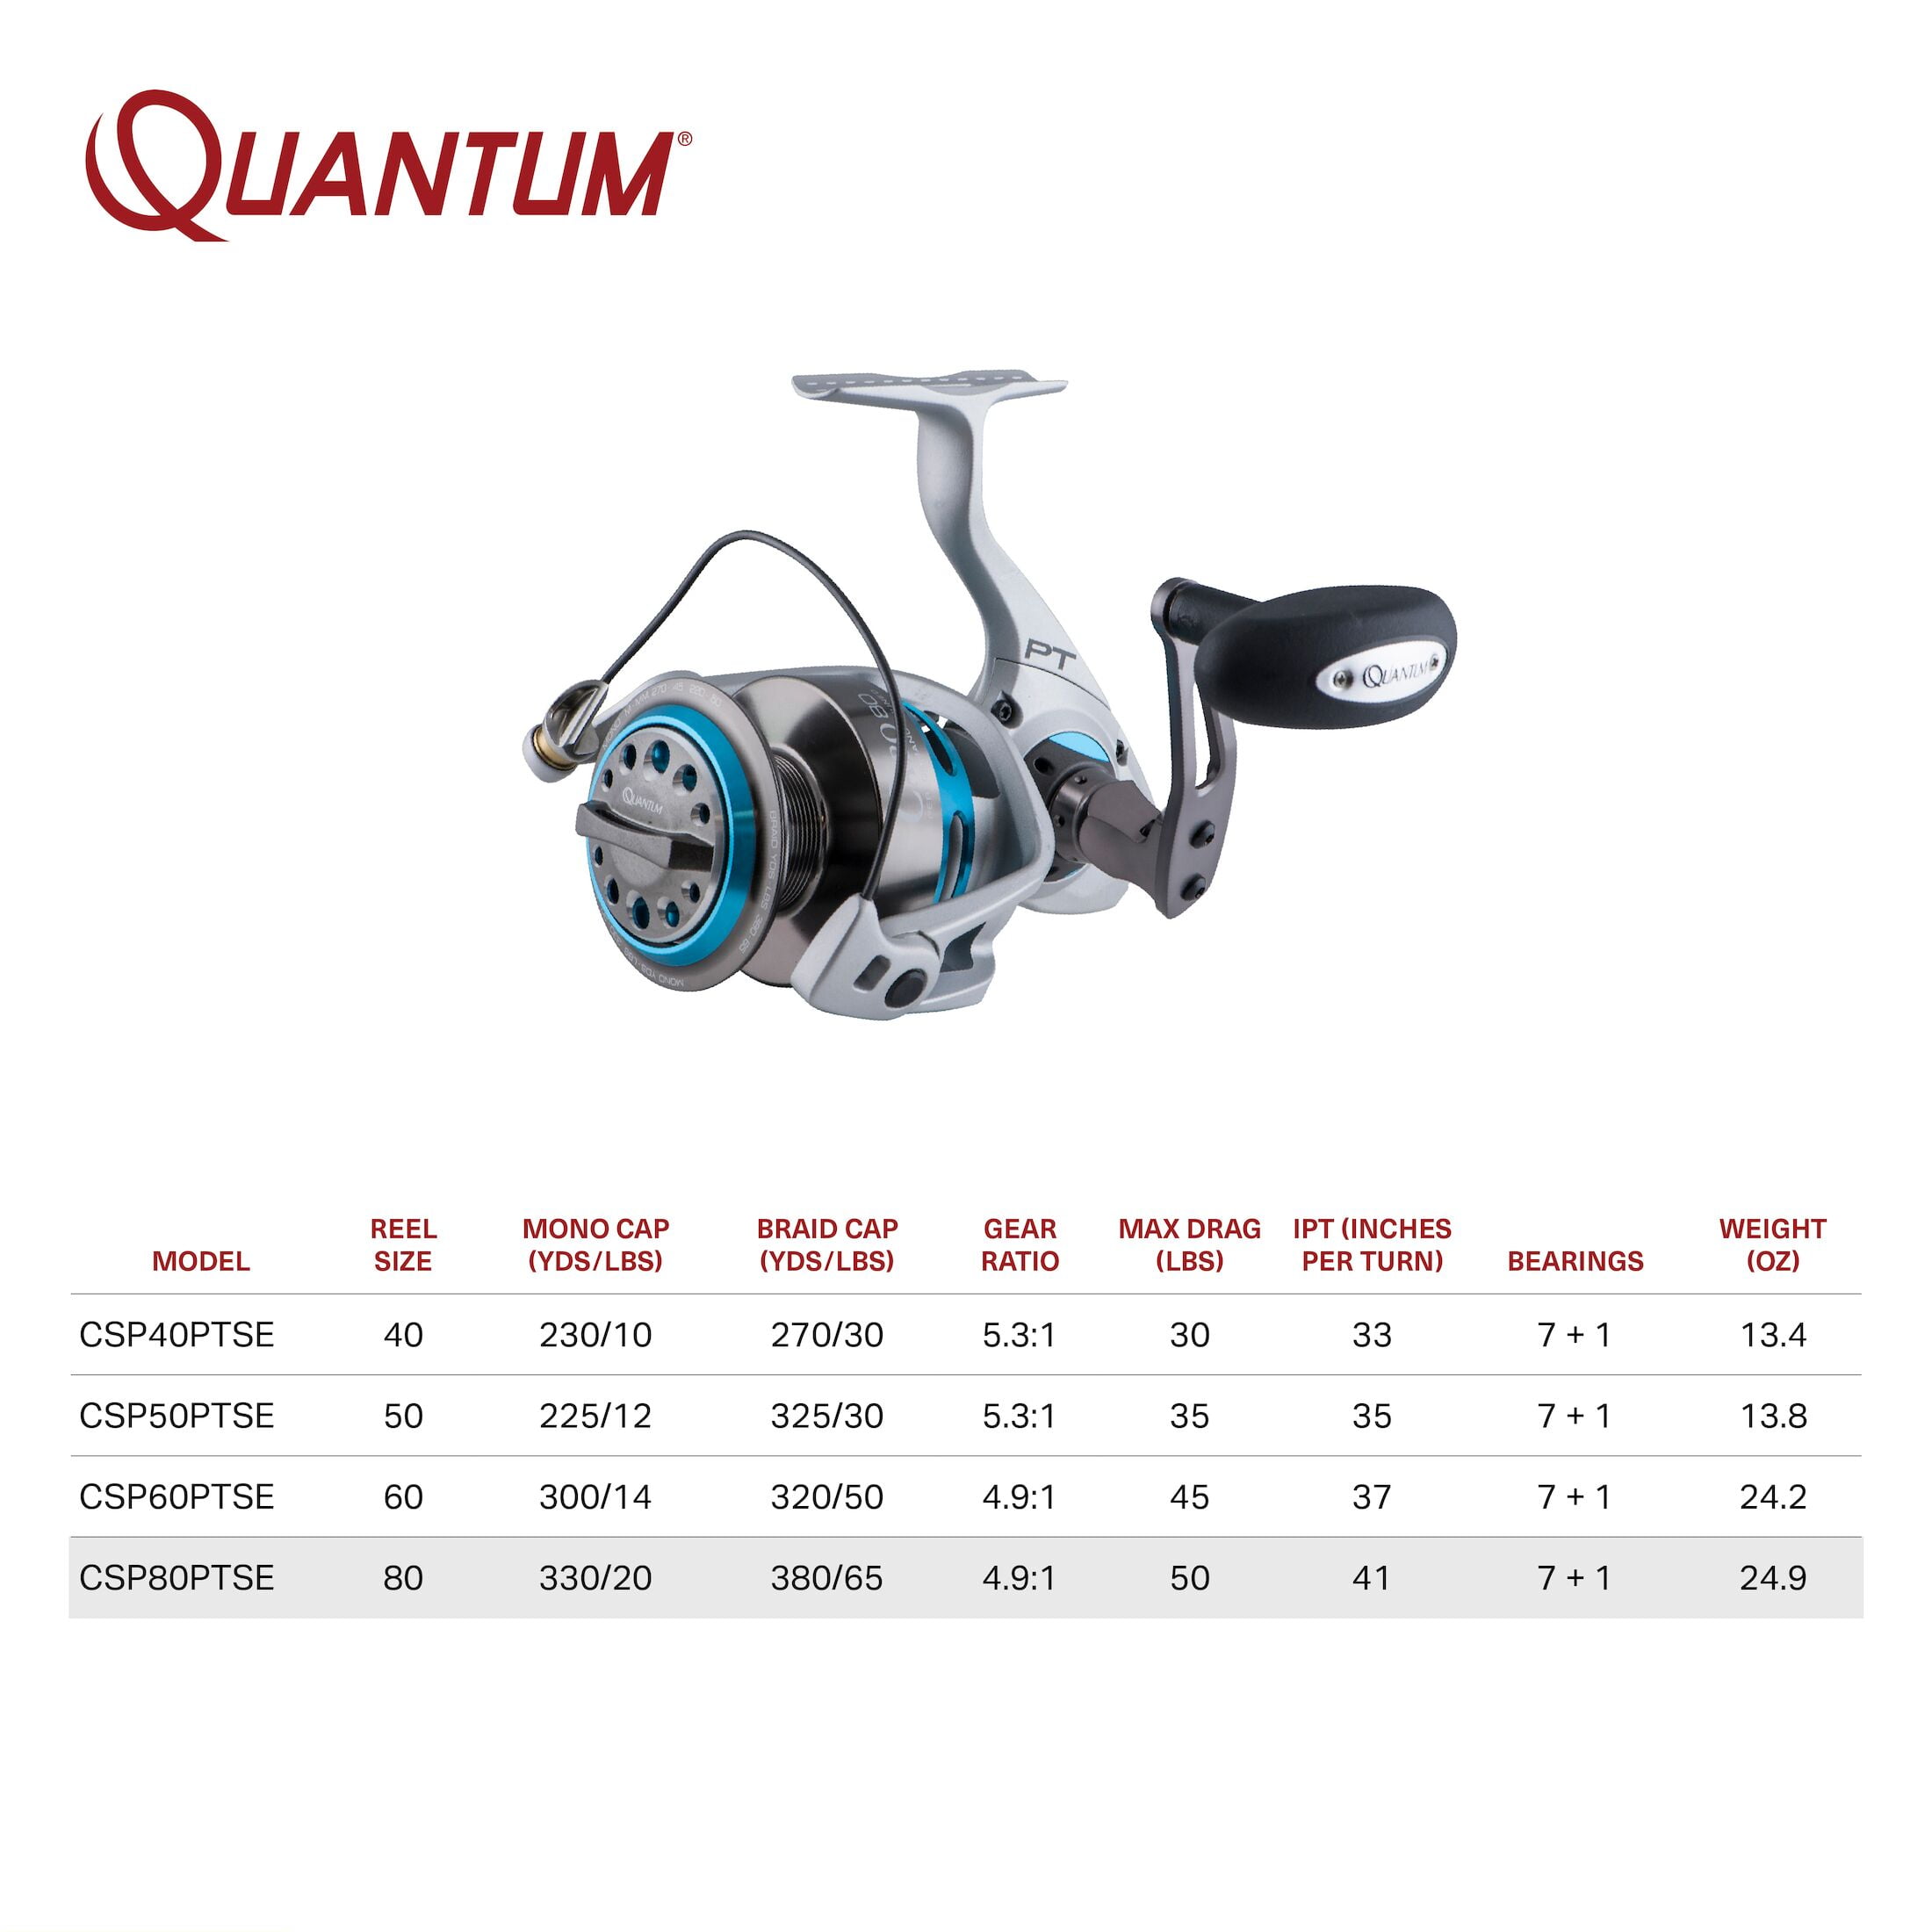 Quantum Cabo Saltwater Spinning Fishing Reel, Size 60 Reel, Silver